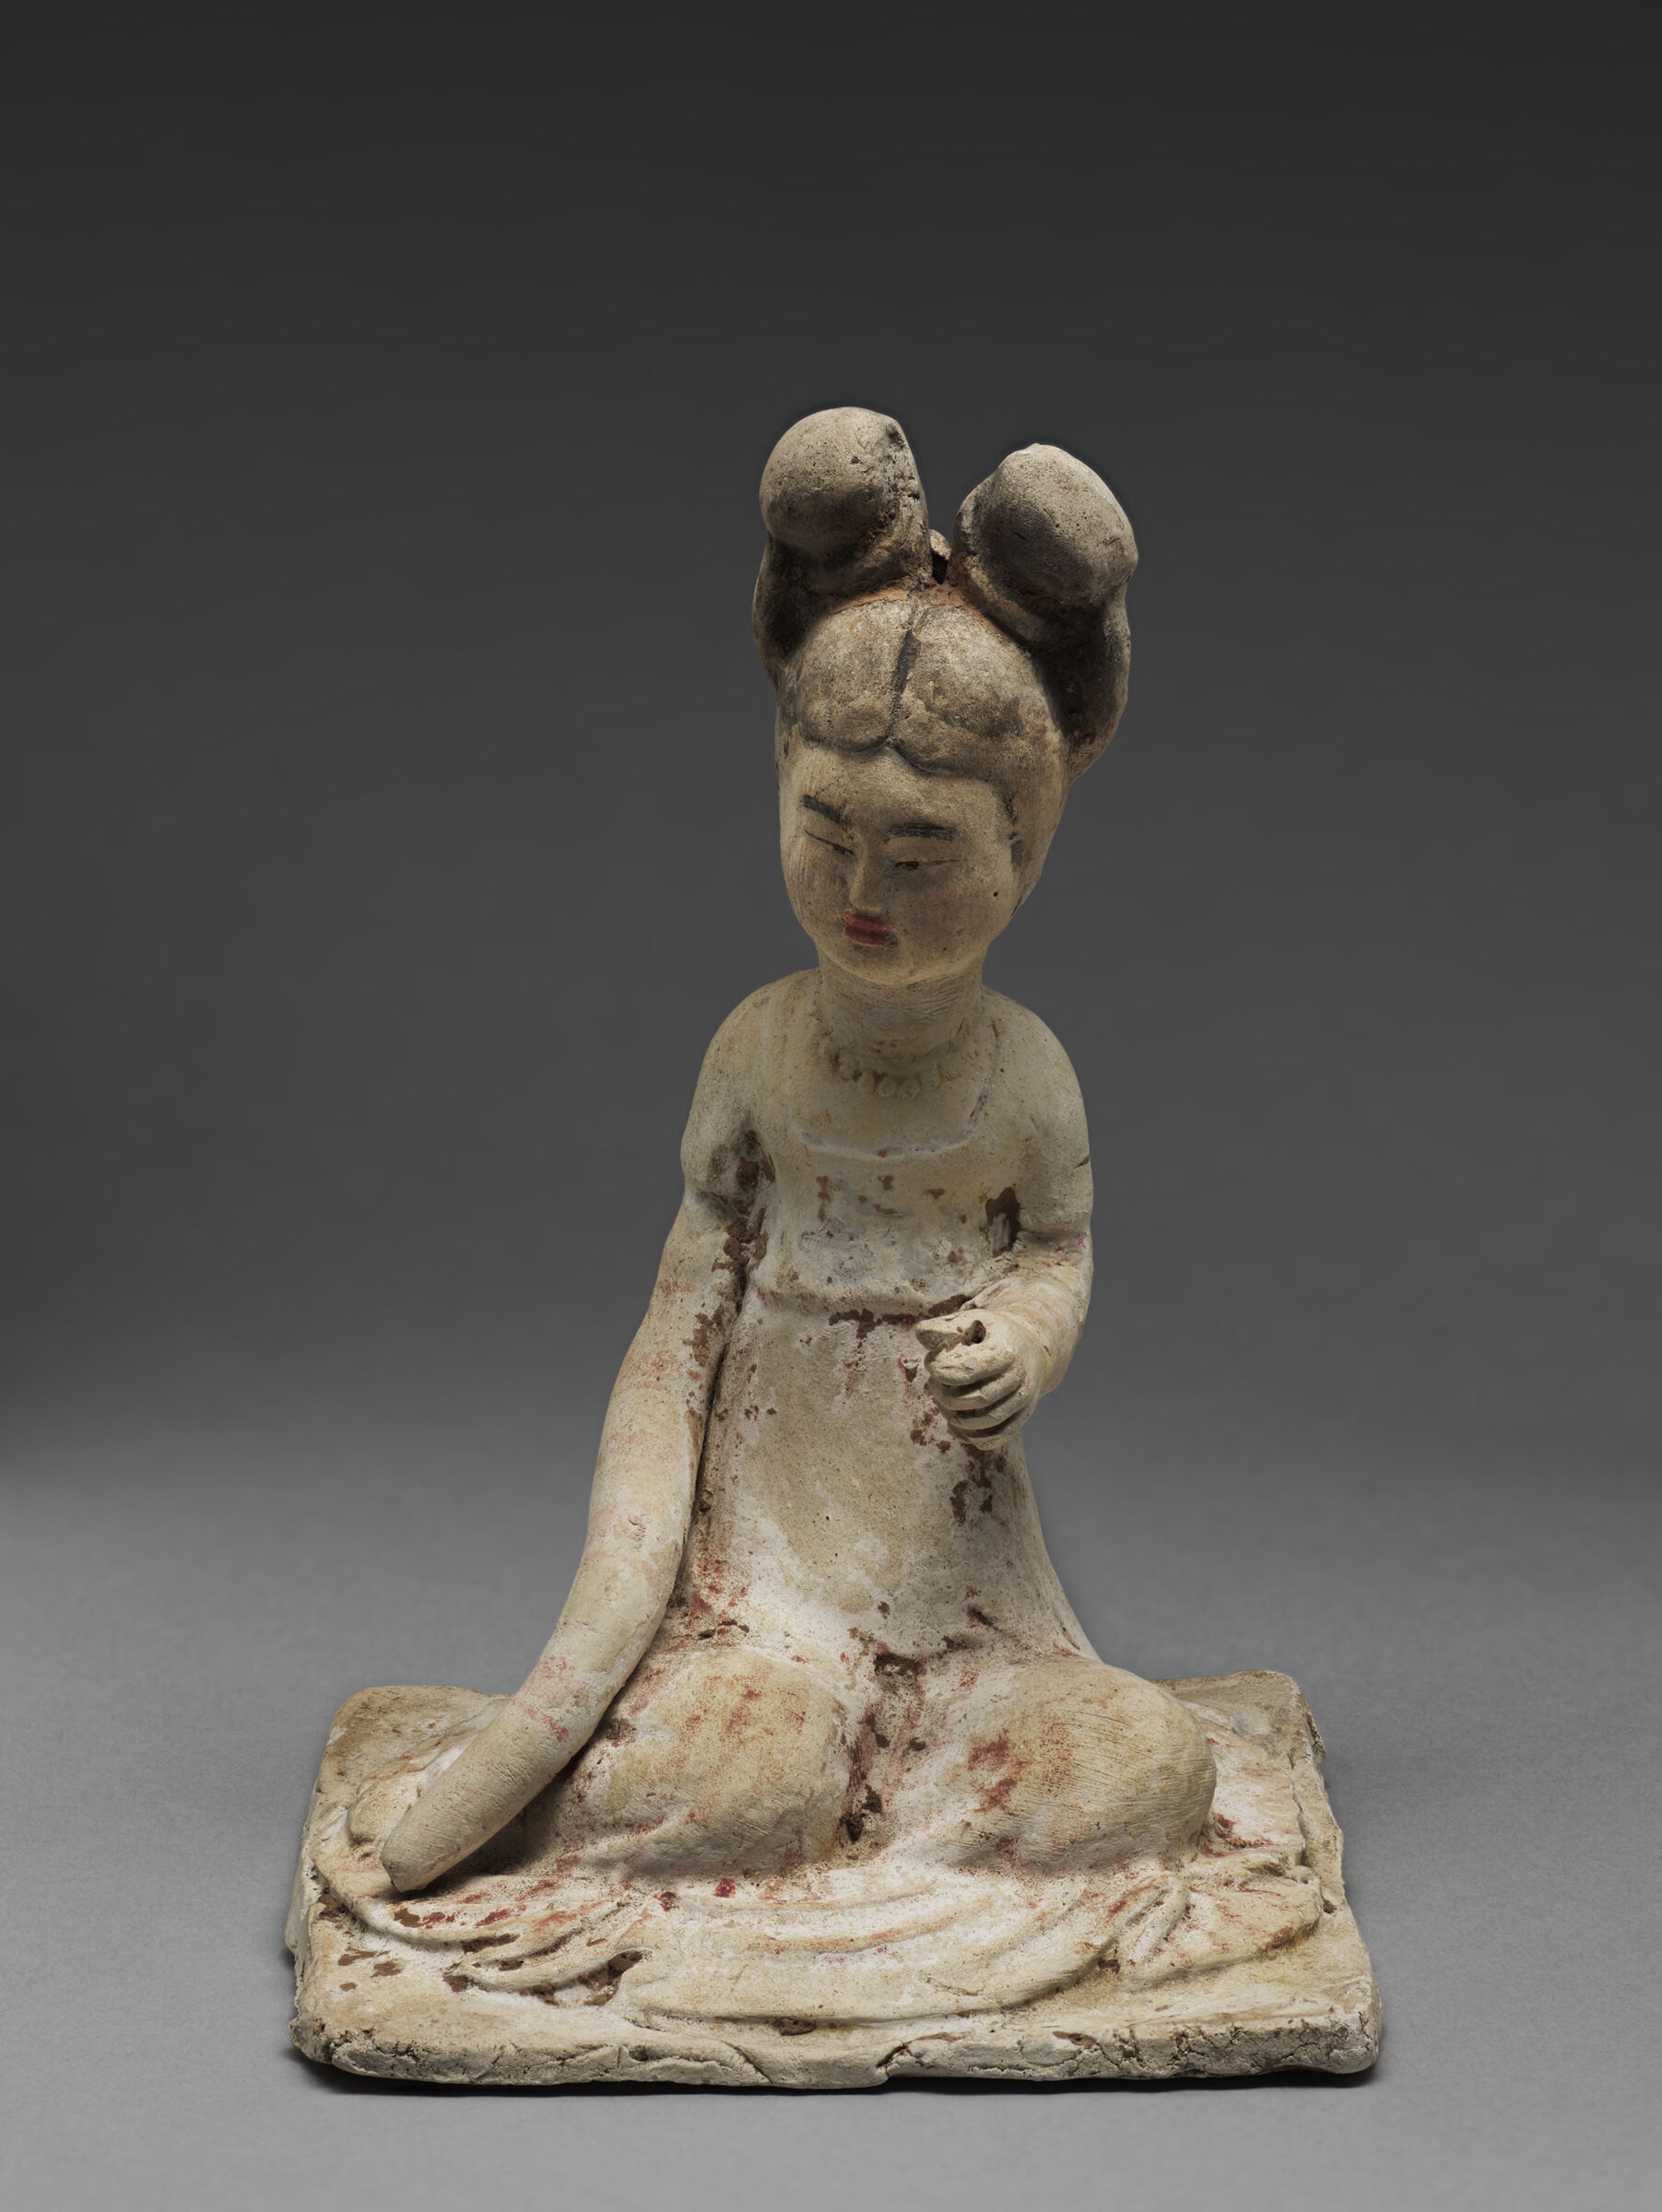 Female Court Musician With Hand Raised, From The Tomb Sculpture Set: Four Kneeling, Female Court Musicians (One With A 'Pipa', Or Lute, And One With Cymbals), Each Of The Four With A High-Waisted, Striped Dress Or Skirt And With Long Hair Arranged In Two Buns